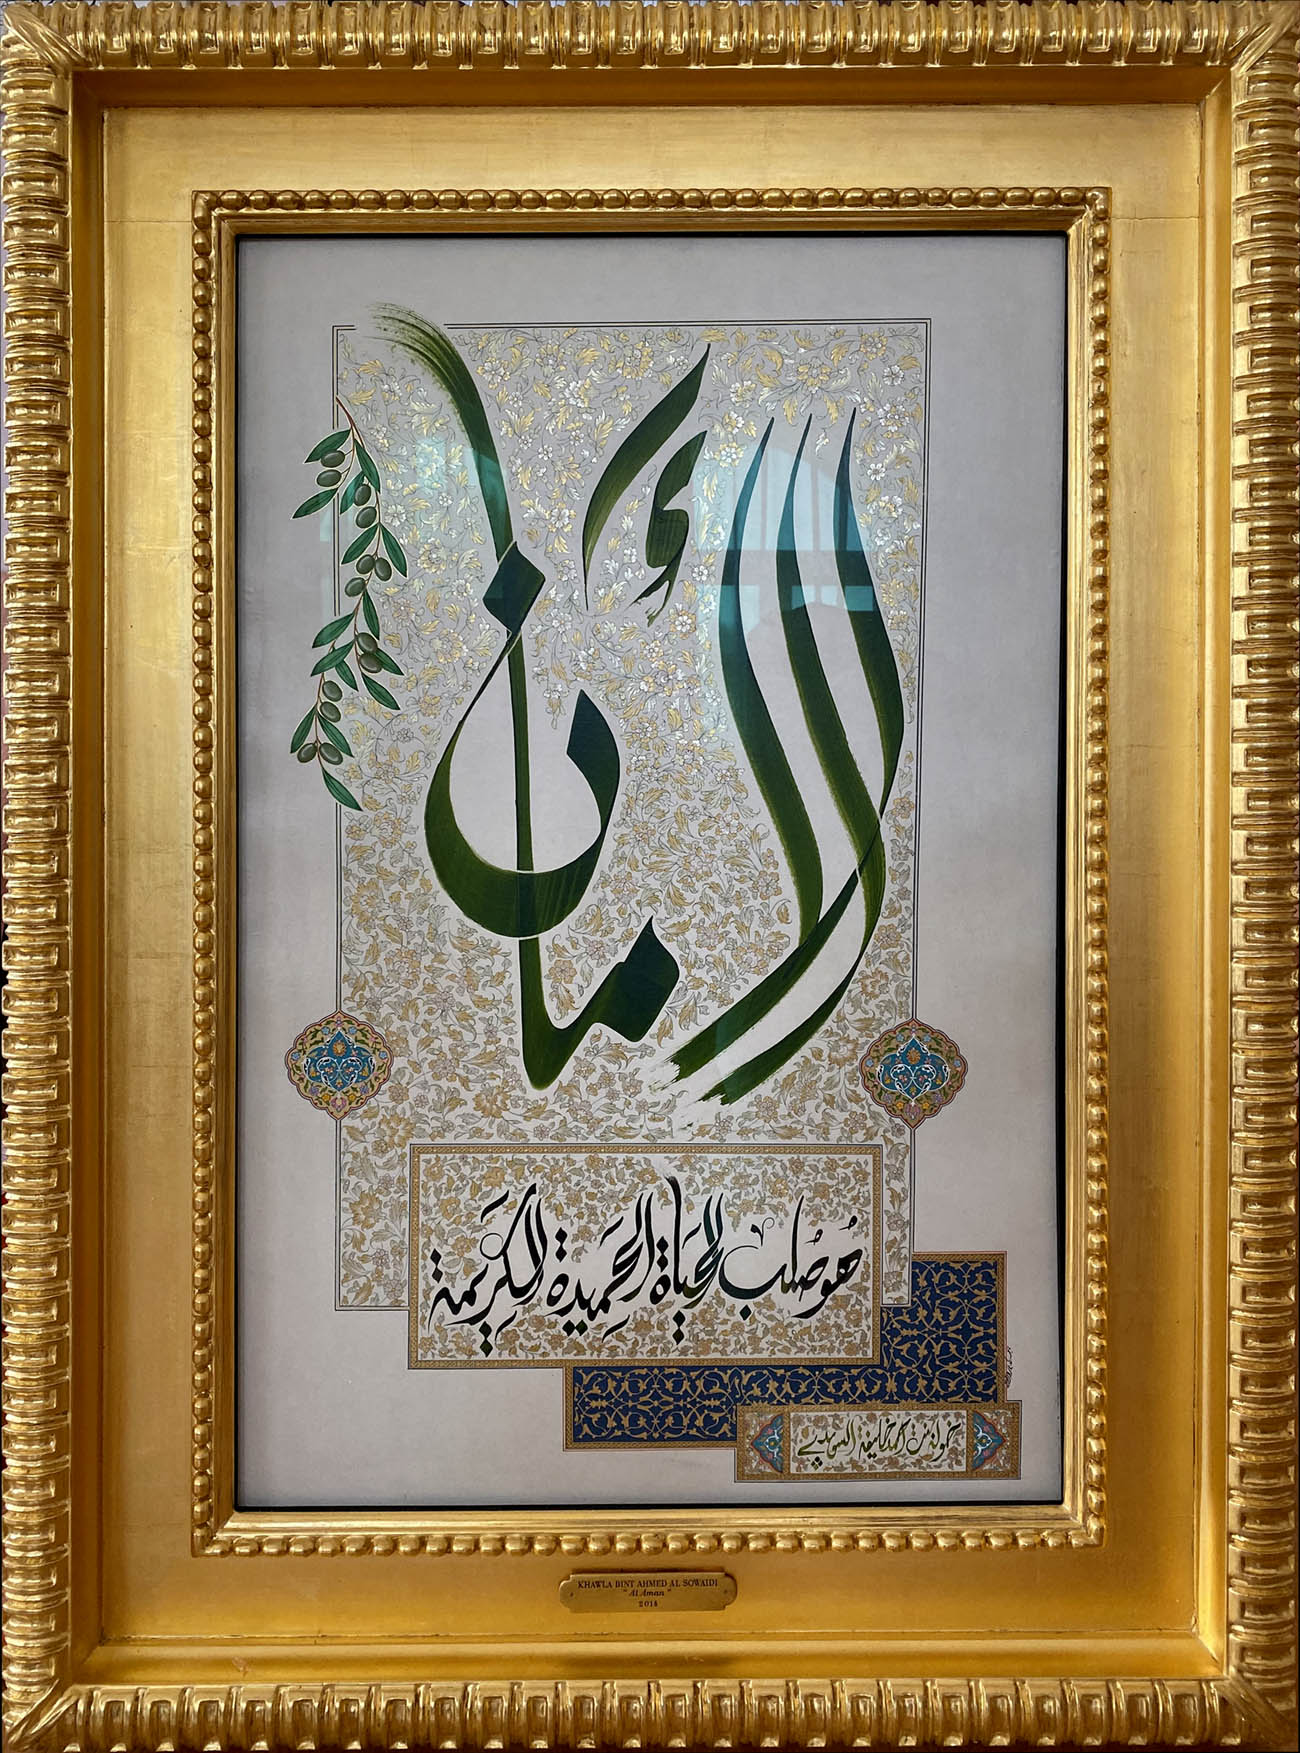 
	Al Aman (Security)

	 

	It is the basis of a virtuous life.

	 

	Security, if present, is the basis of life and glory.

	It ensures prosperity and goodness.

	 

	116 x 83 cm - 45.6 x 32.6 inches

	2014

	Eloquent Poetry

	 
, Her Highness Sheikha Khawla Bint Ahmed Khalifa Al Suwaidi,Khawla Sheikha, Sheikha Khawla,خوله, Khawla Suwaidi,Khawla, khawla al sowaidi,khawla sowaidi,Khawla Al Suwaidi,National Poetry, Poetry, Arabic poems, Arab poet,Arab calligrapher,Arab artist,خوله السويدي, khawla alsuwaidi,khawla al suwaidi, peace and love exhibition at saatchi gallery london, peace & love,arabic poem,arabic poetry,peace and love, peace ,love, sheikha khawla bint ahmed bin khalifa al suwaidi,sheikha khawla bint ahmed bin khalifa al suwaidi,khawla  al suwaidi,khawla  alsuwaidi, khawla, خوله السويدي , خوله بنت احمد بن خليفه السويدي , خوله   احمد   السويدي  